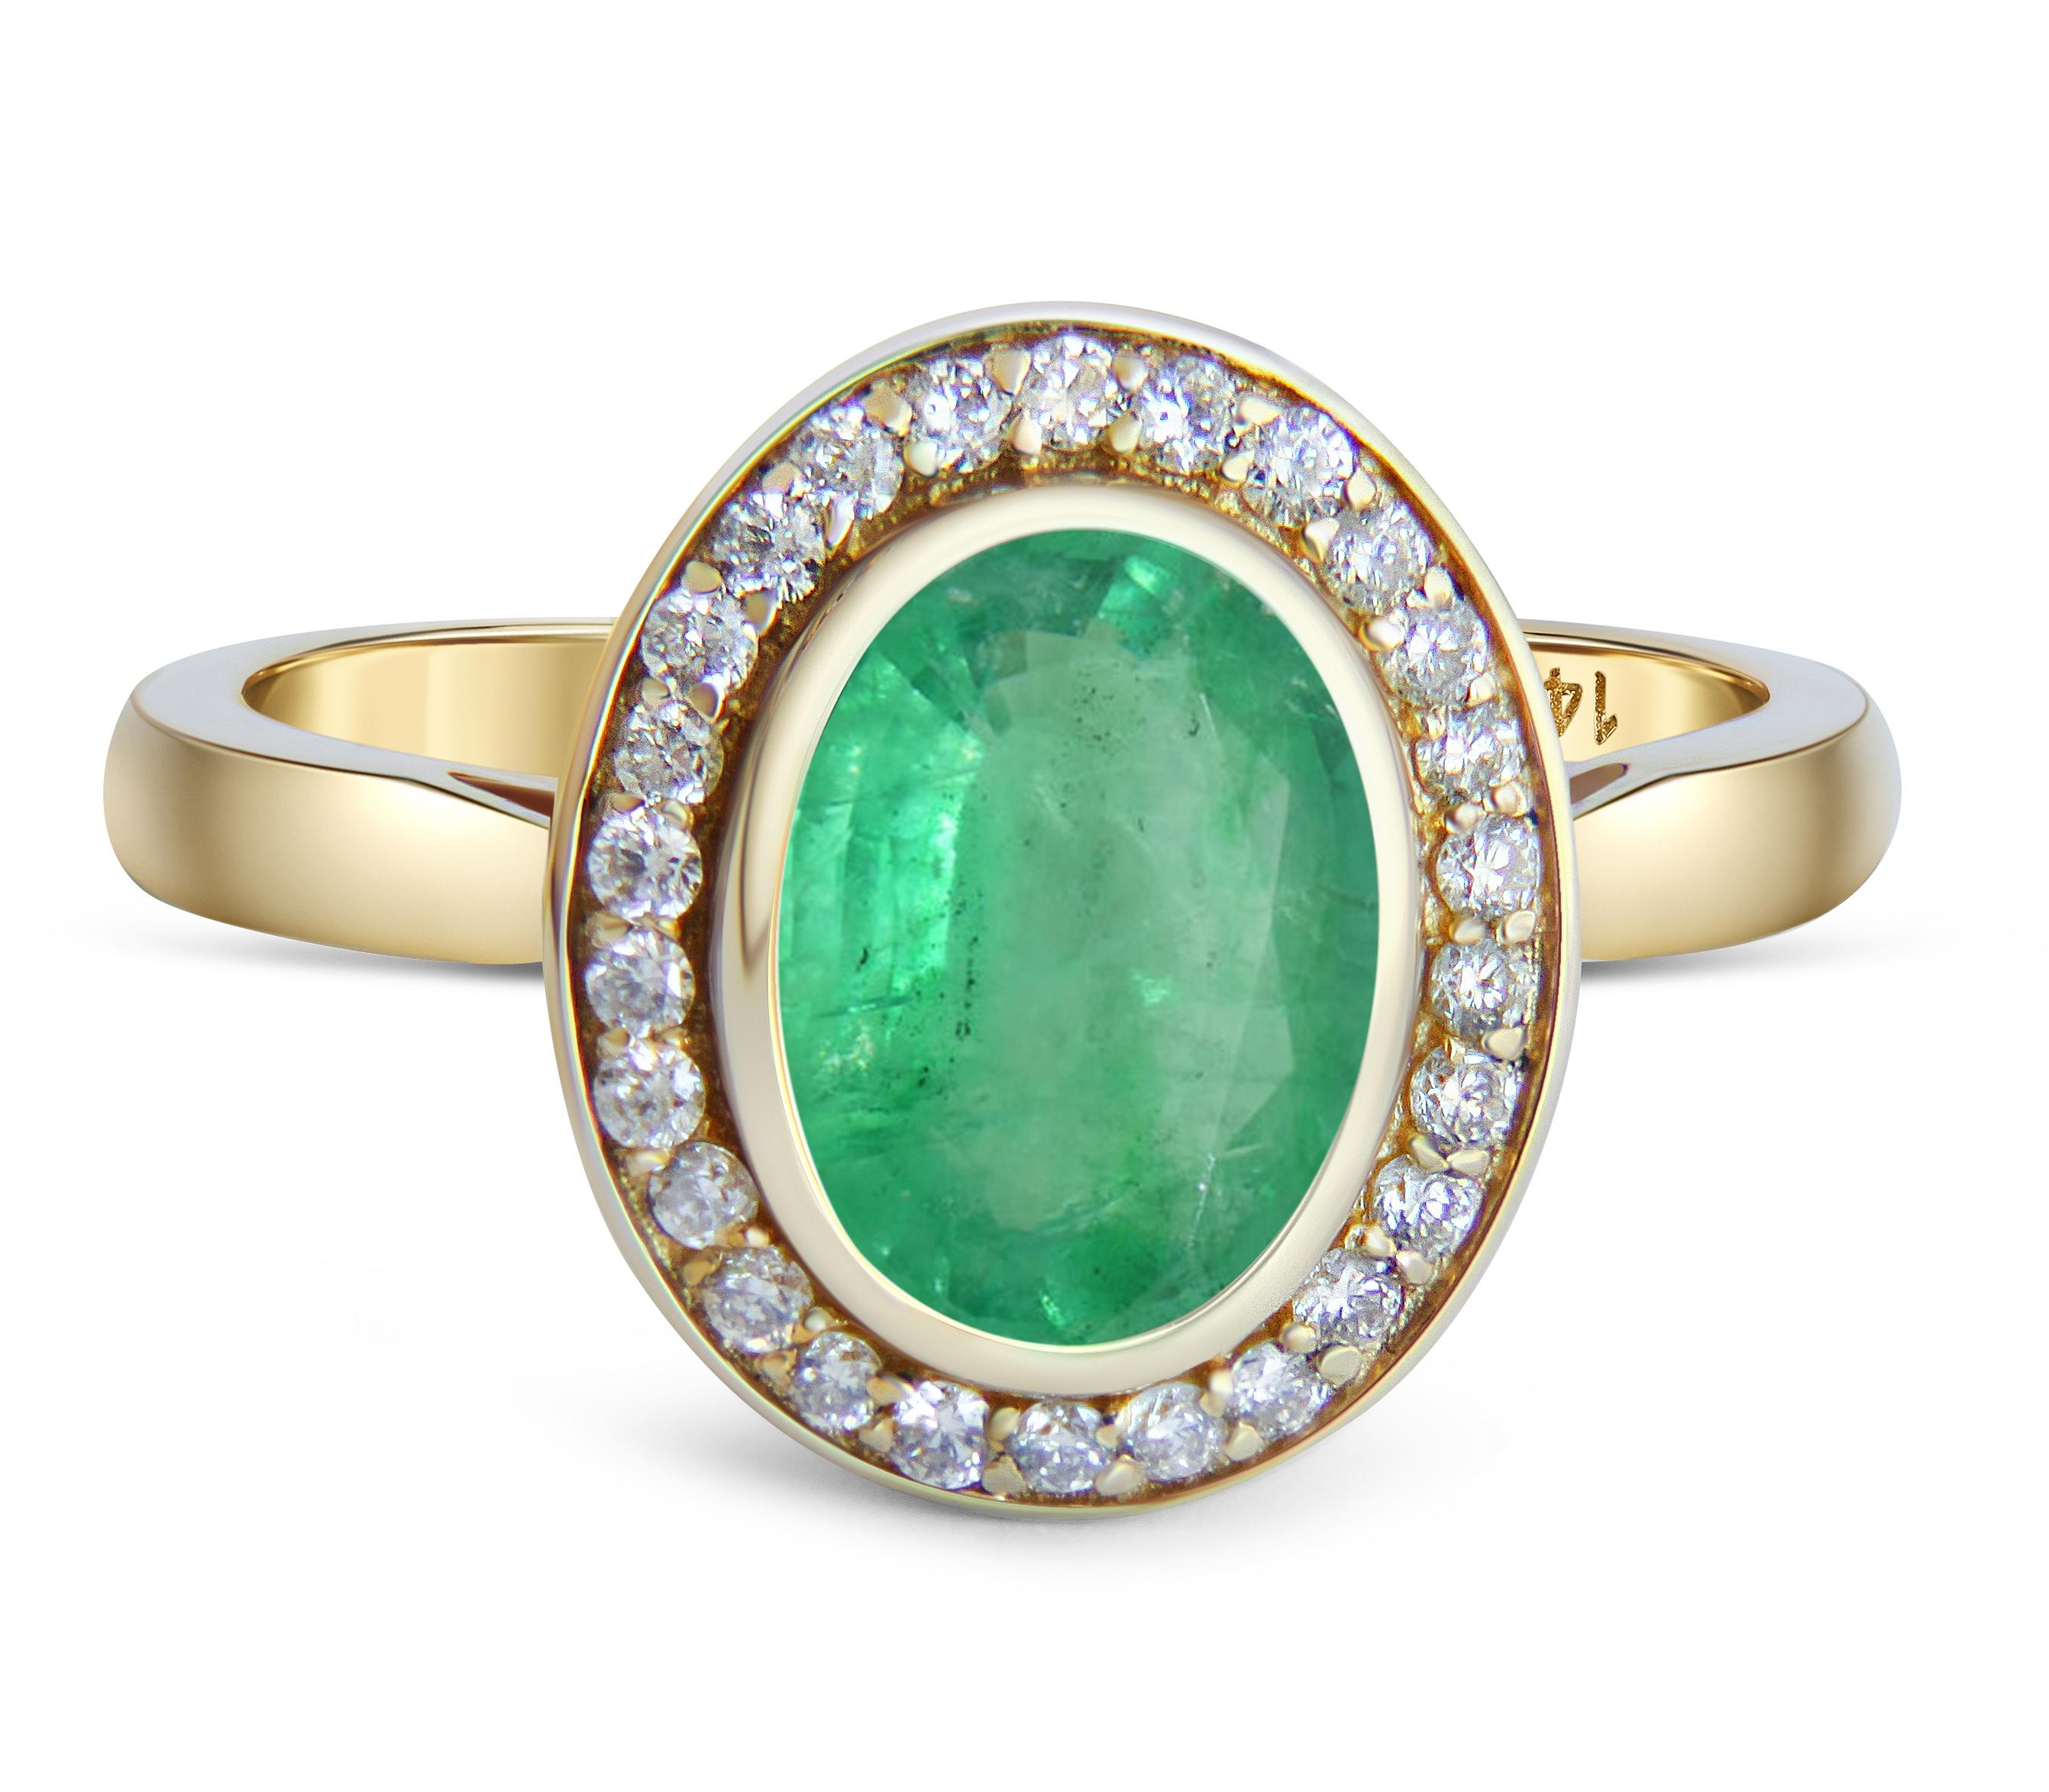 Emerald and diamonds 14k gold ring. 
Oval Emerald gold ring. Emerald diamond halo ring. Green gemstone ring. May birthstone ring.

Metal: 14k gold
Weight: 3 gr depends from size

Gemstones:
Emerald - 1 piece
Cut - oval
Color - green
Weight - 0.85